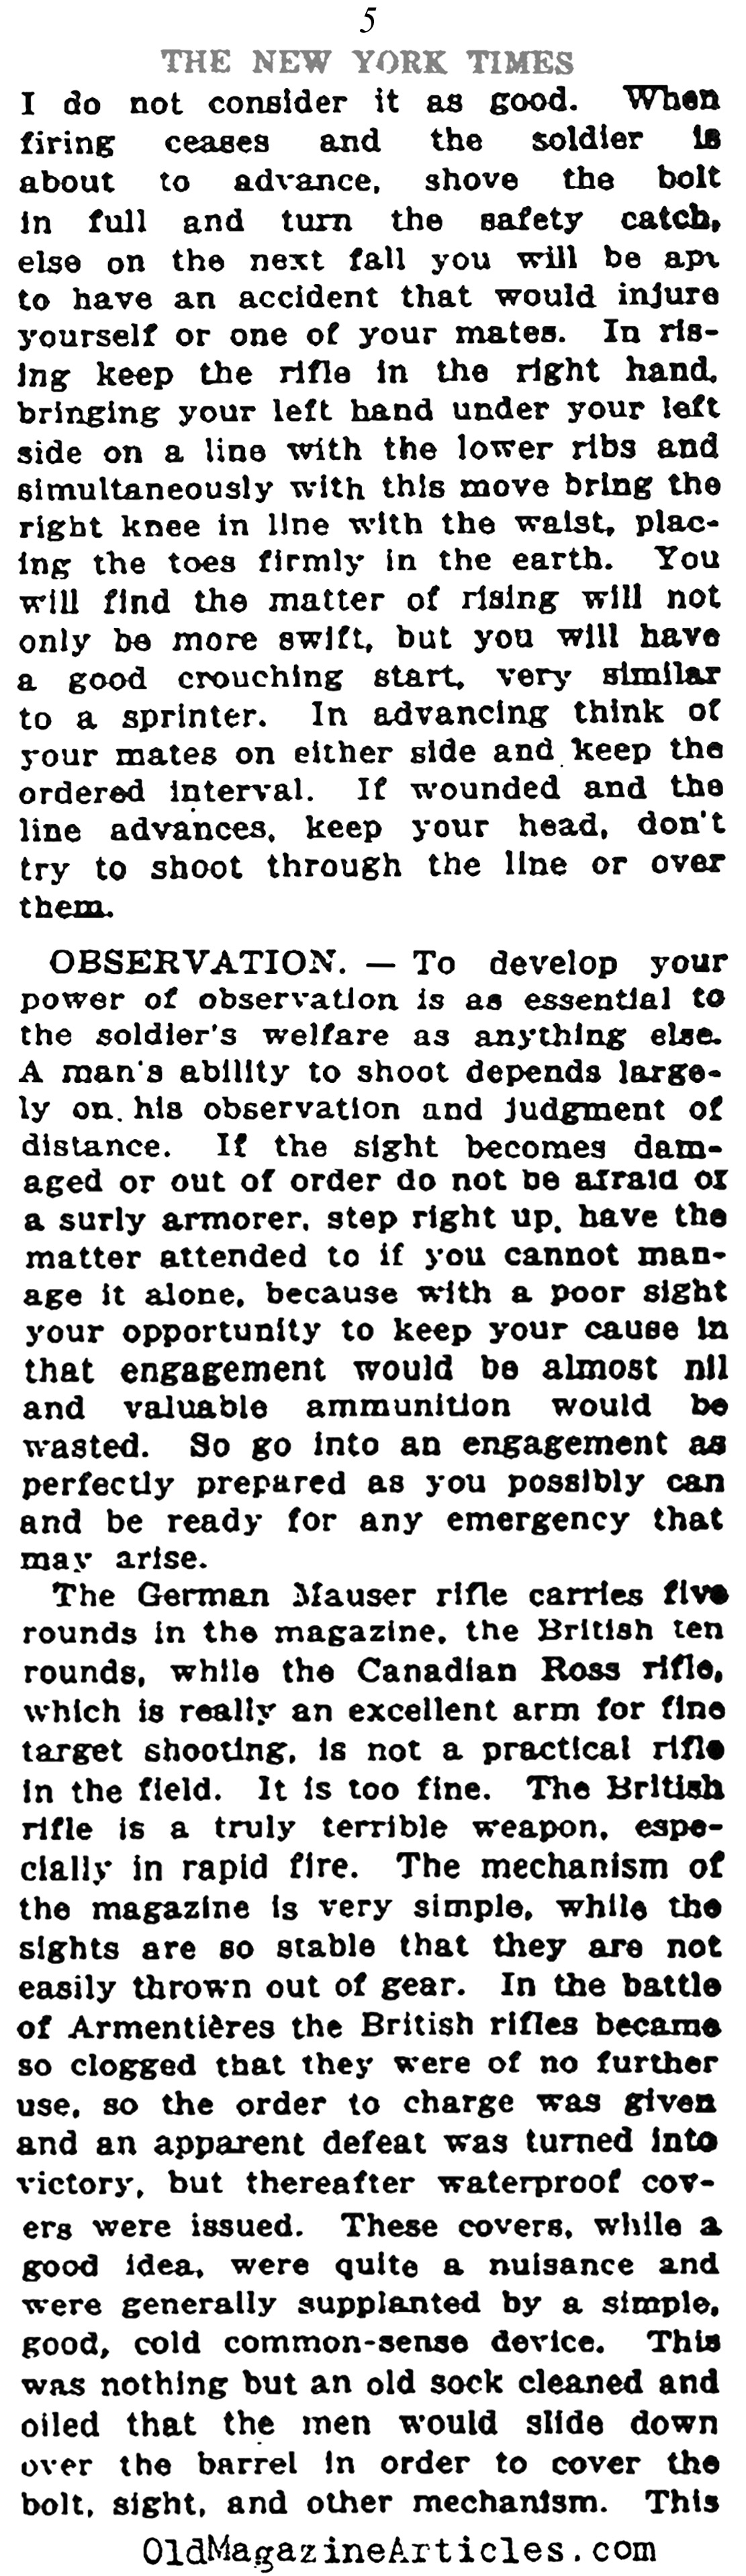 Letter from a Veteran (NY Times, 1916)